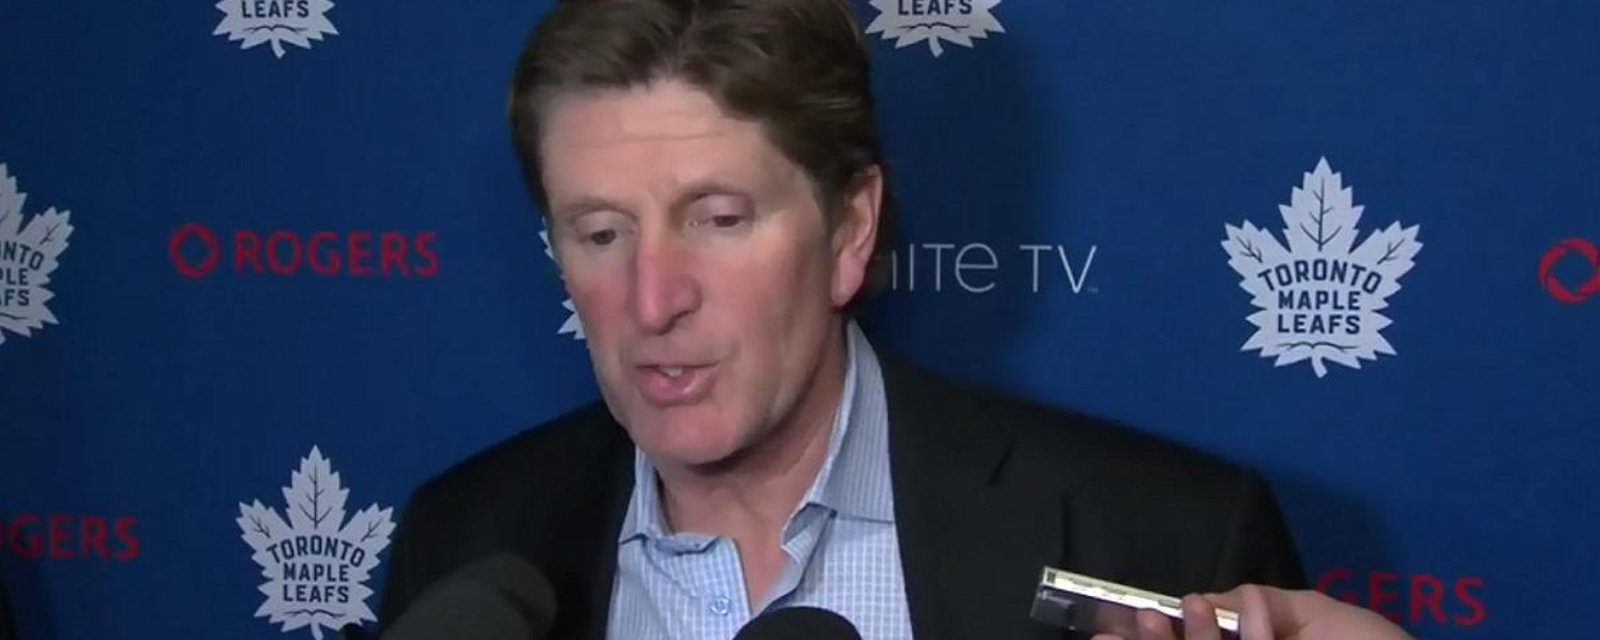 Mike Babcock shares heartfelt comments on the passing of his friend Ted Lindsay.